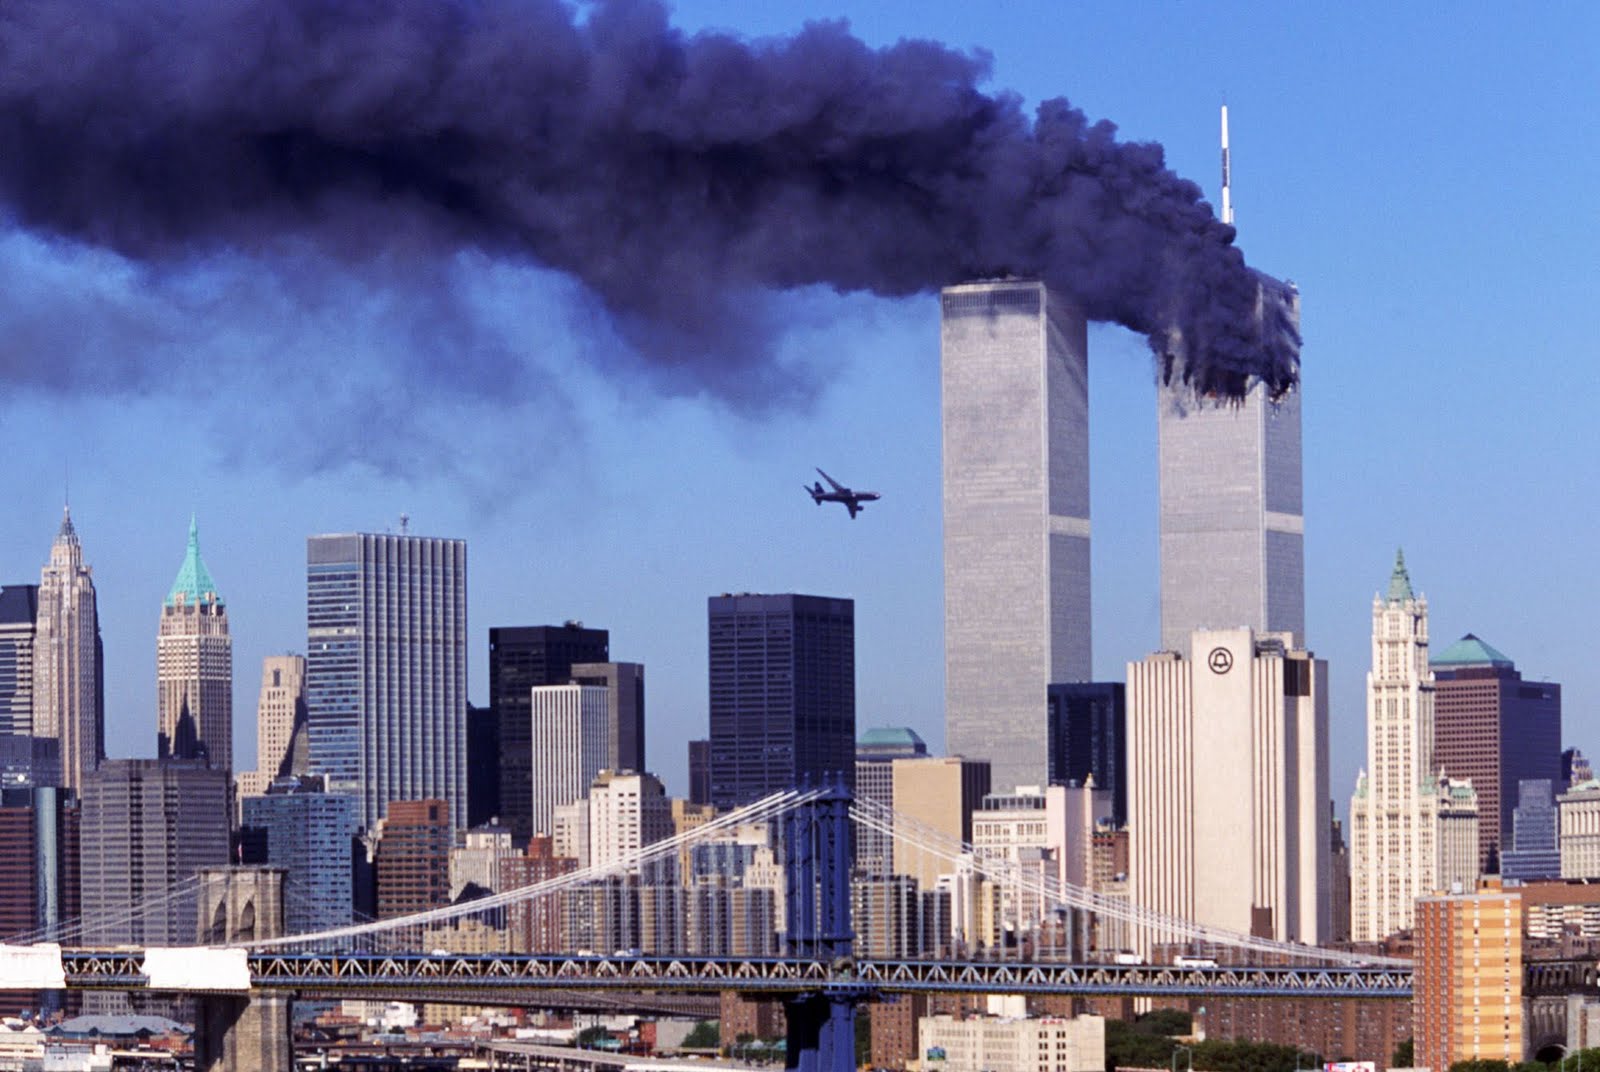  airplane crashes to the World Trade Center New York 11 Sept 2001 1600x1072